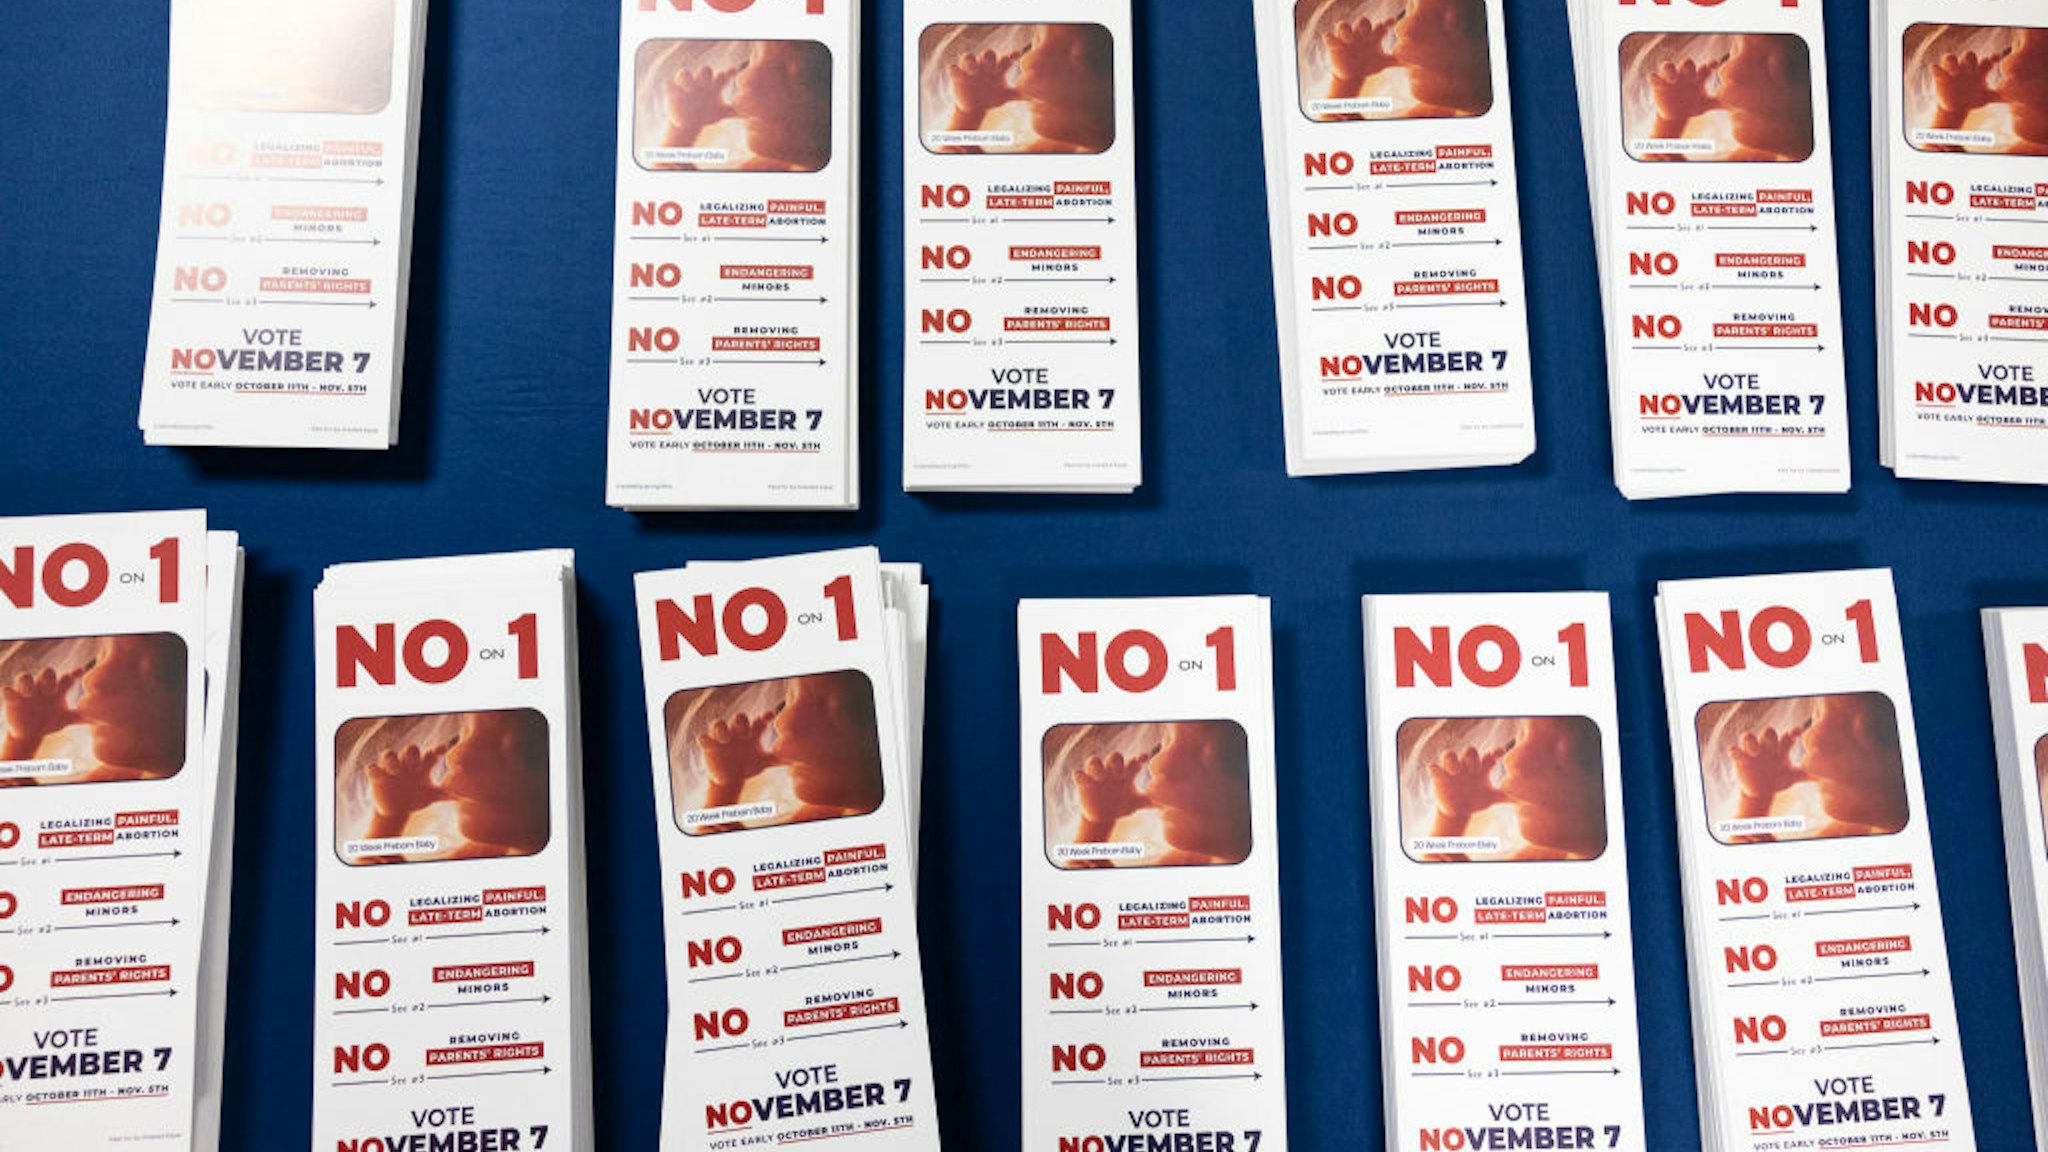 Pro-life pamphlets lay on a table at Columbus Christian Center at a pro-life canvasing meeting in Columbus, Ohio on November 4, 2023. The US state of Ohio will decide whether to guarantee the right to abortion in a potential 2024 bellwether on November 7 as both sides of the American political machine establish their campaign strategies on this crucial issue one year out from the presidential election. Voters will choose whether to amend the midwestern state's constitution to promise the freedom to "make and carry out one's own reproductive decisions, including... abortion," or to leave the document unchanged, allowing for a potential state ban. (Photo by MEGAN JELINGER / AFP)